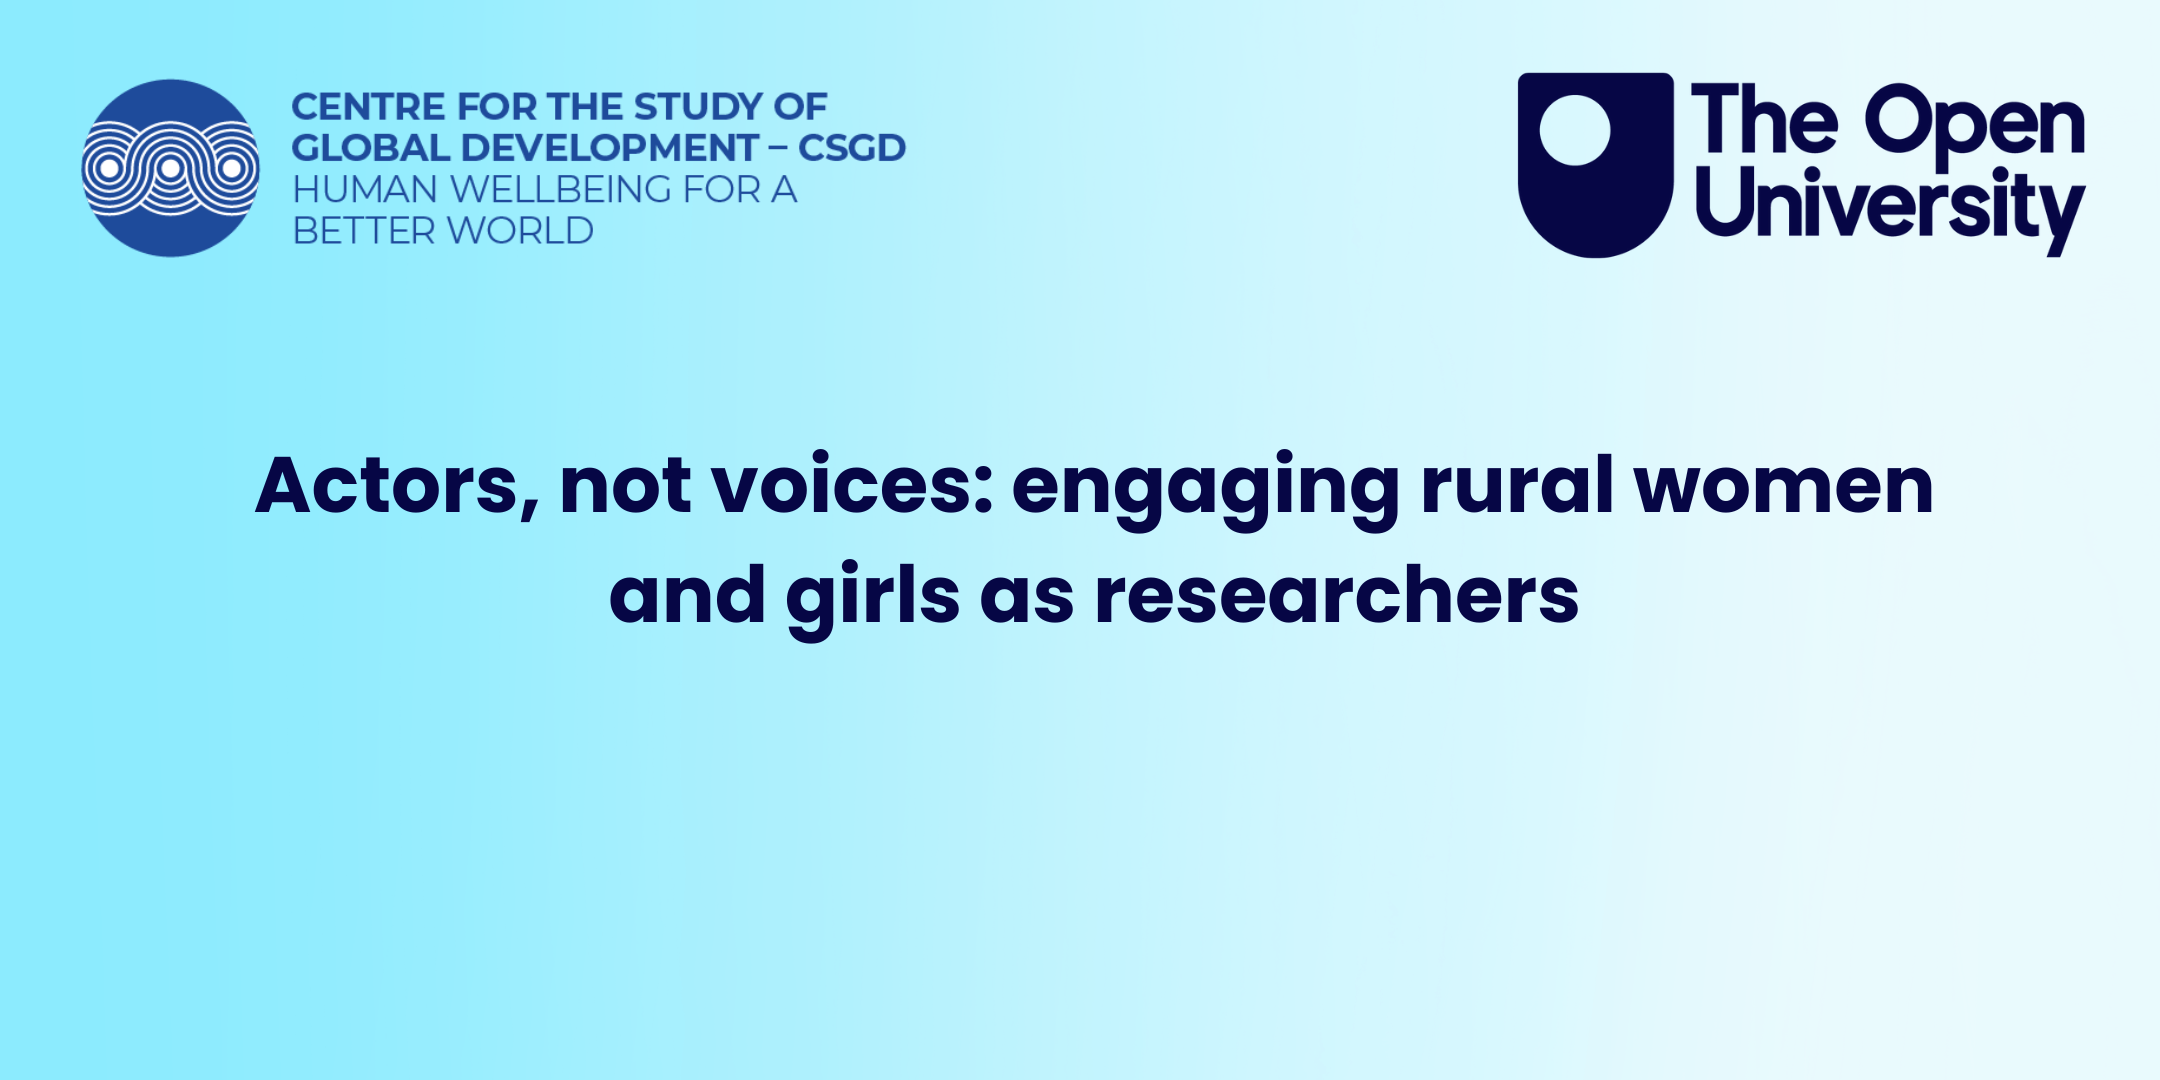 Actors, not voices: engaging rural women and girls as researchers